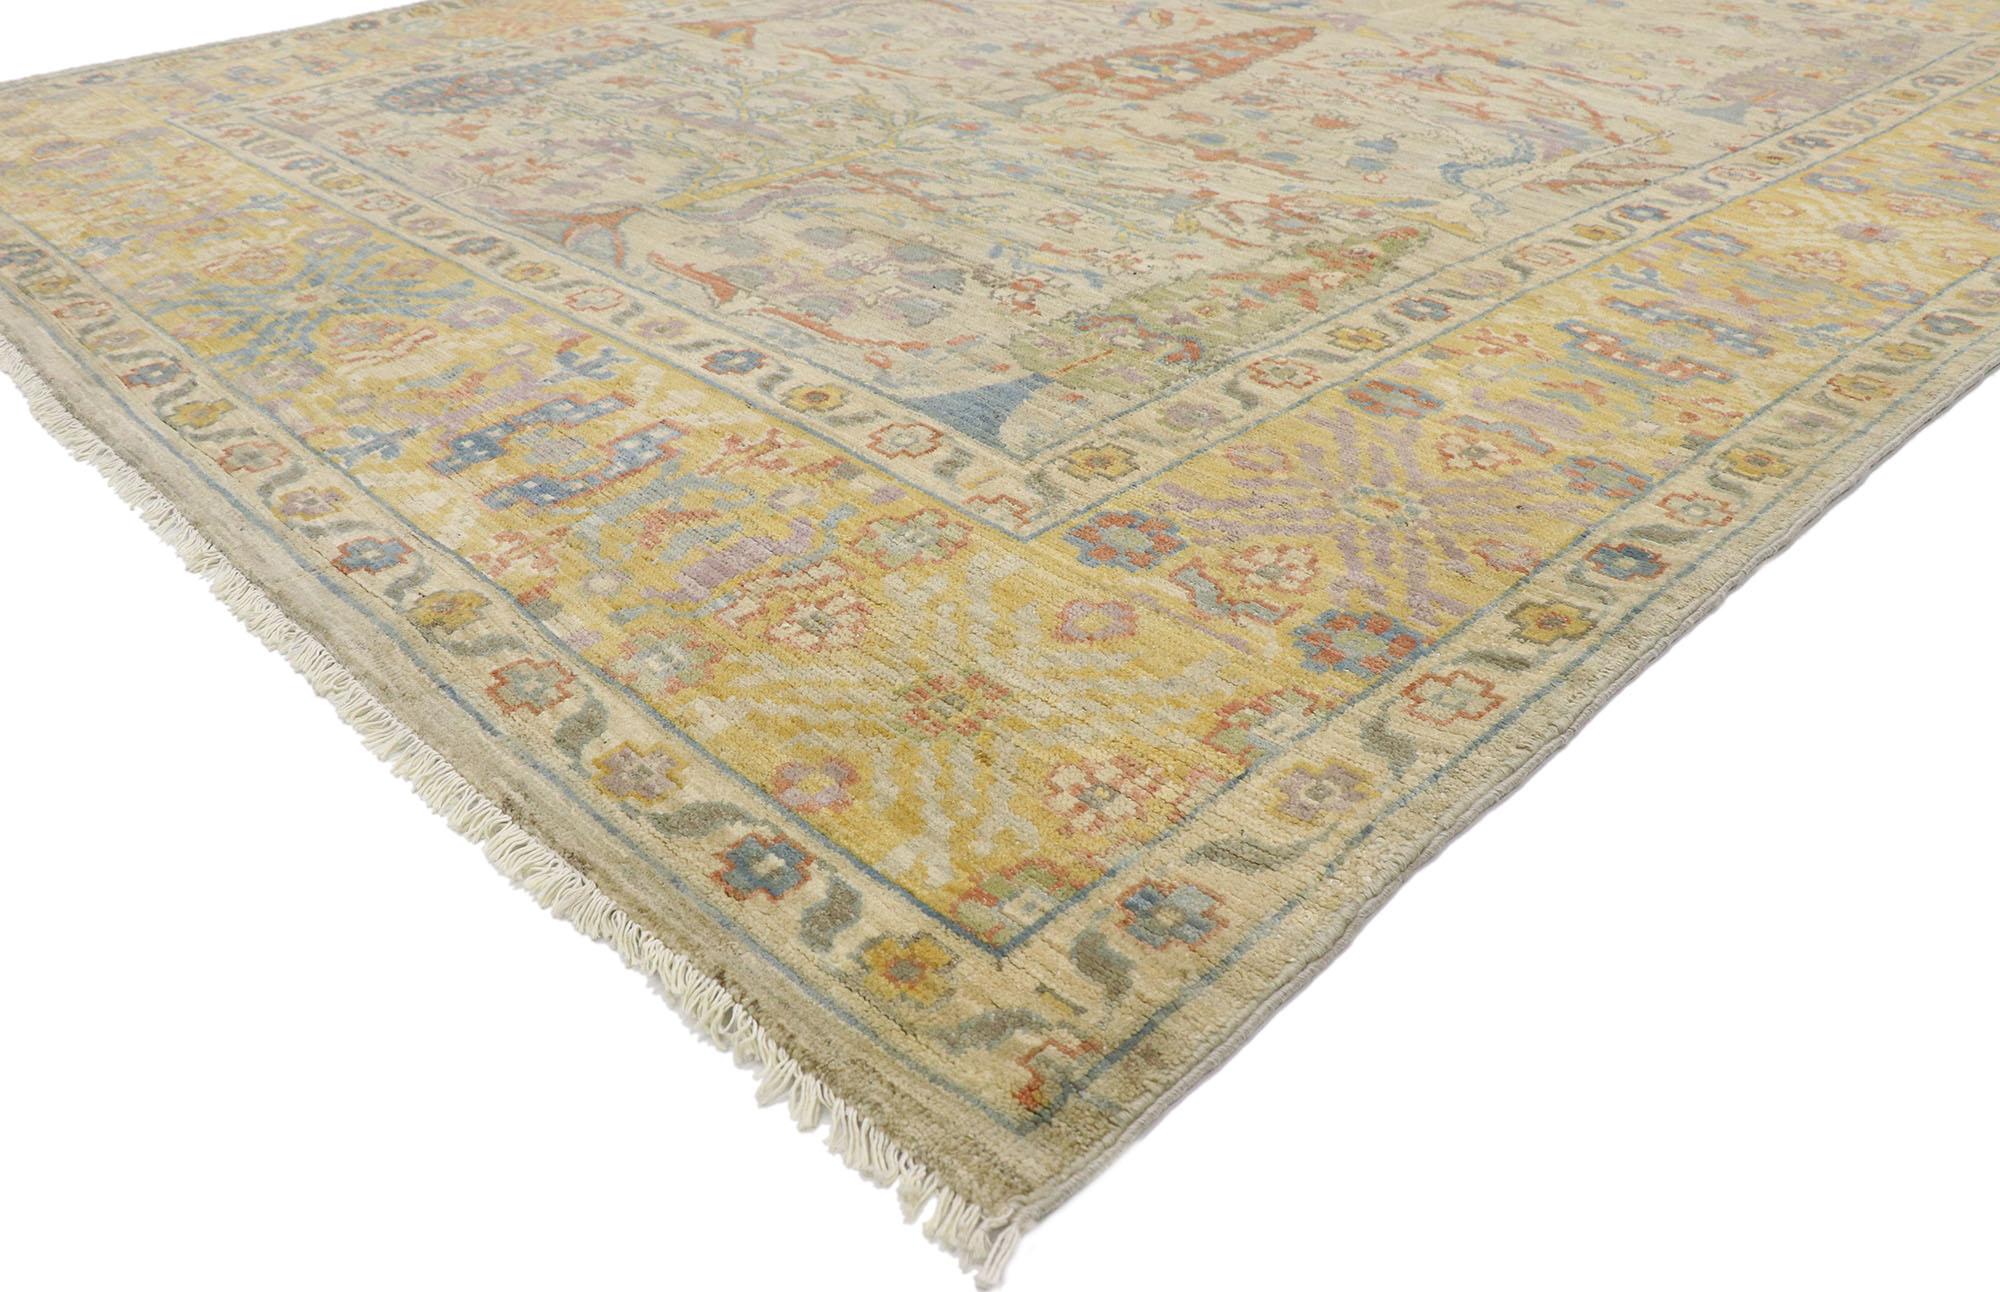 80677 New Contemporary Oushak Tree of Life Rug 08'00 x 09'07. Give the look of woven wonders and decorative elegance with this hand-knotted wool contemporary Pakistani Oushak rug. Showcasing a directional rug layout in soft earth-tone colors, this